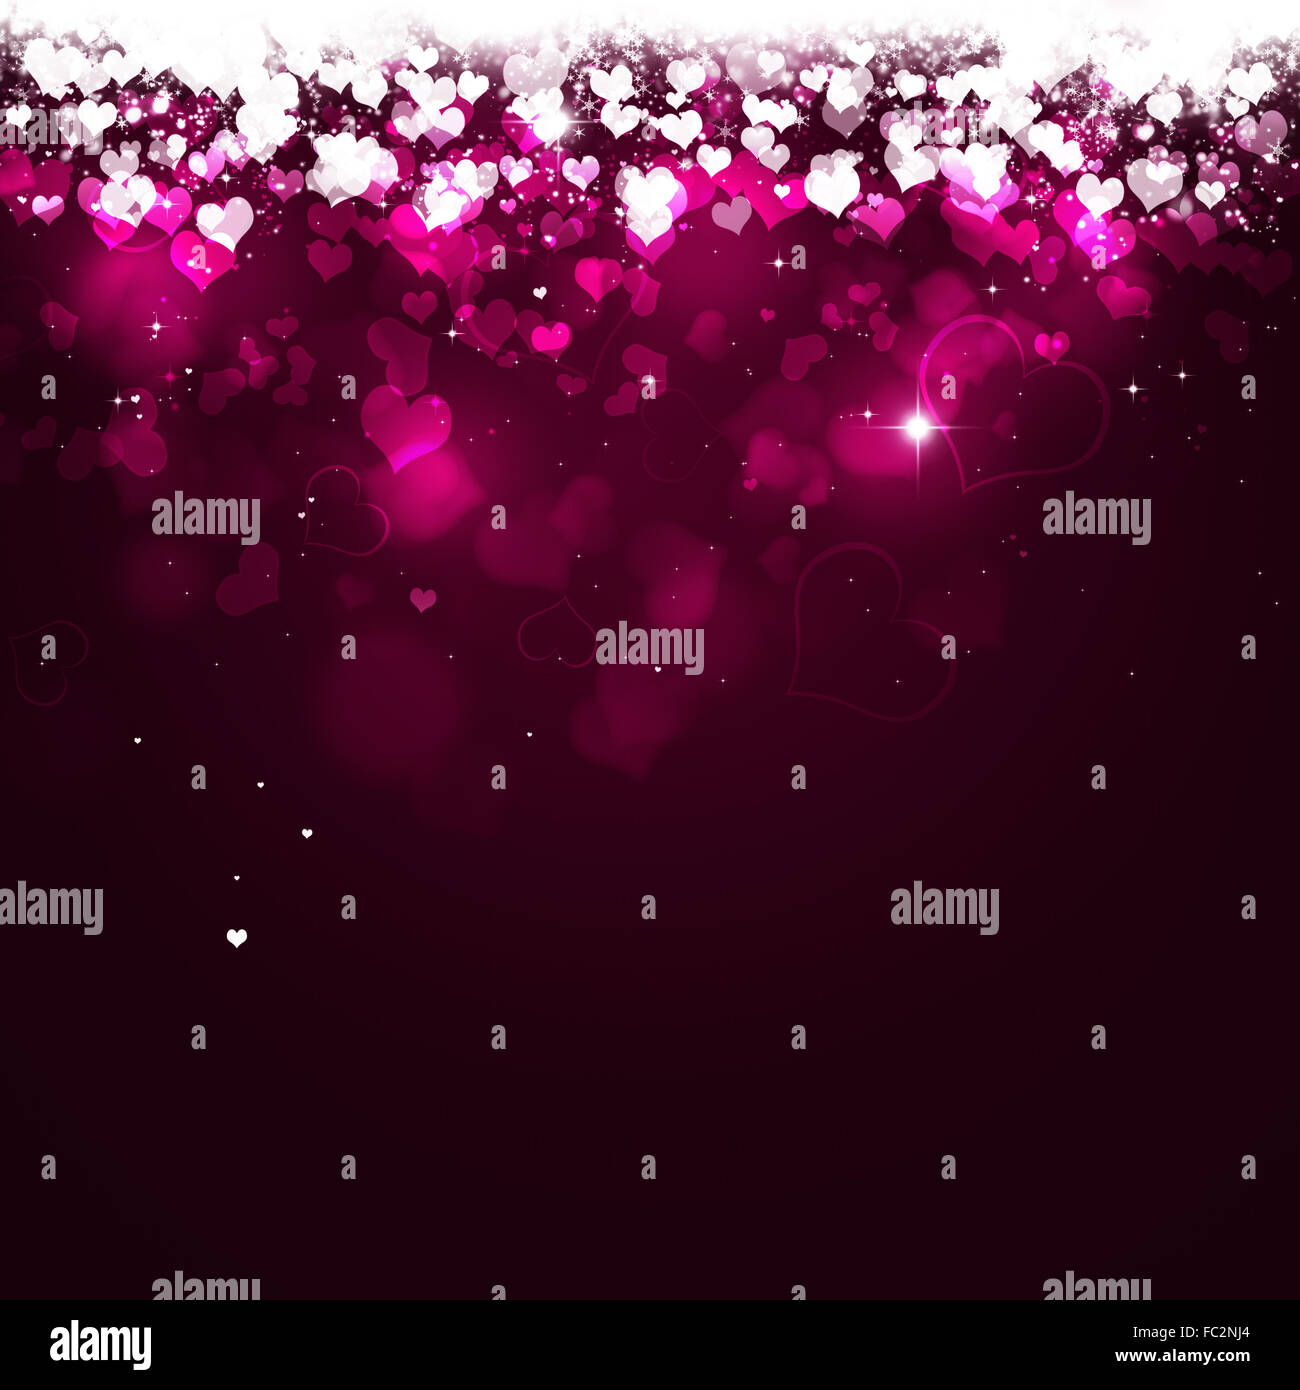 bright Valentine day background with blurry falling hearts and lights Stock Photo